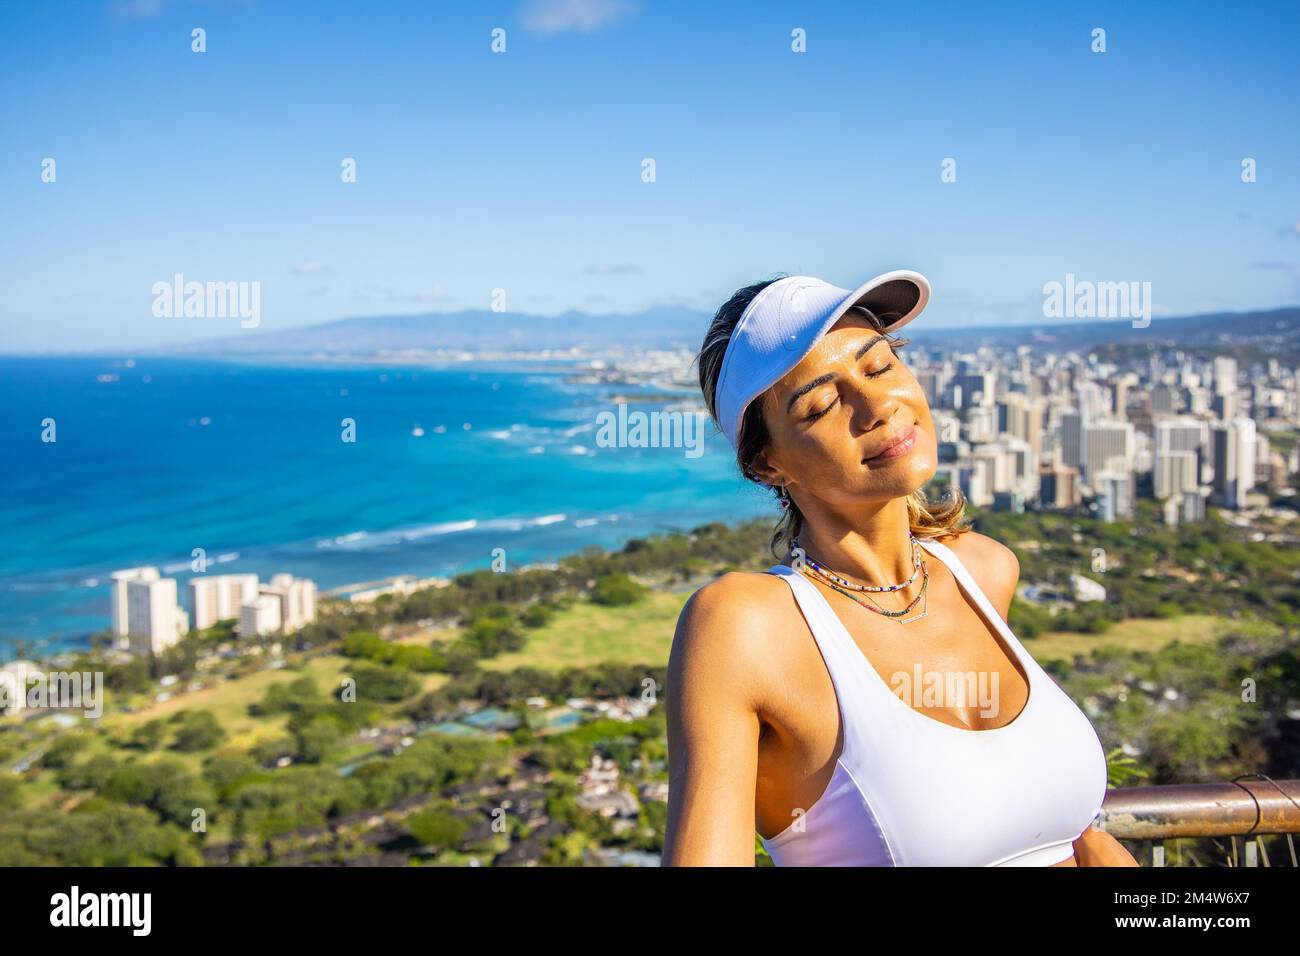 Portrait of a young Caucasian woman Enjoying hervacation on O'ahu Island, Hawaii with the city of Honolulu in the background Stock Photo